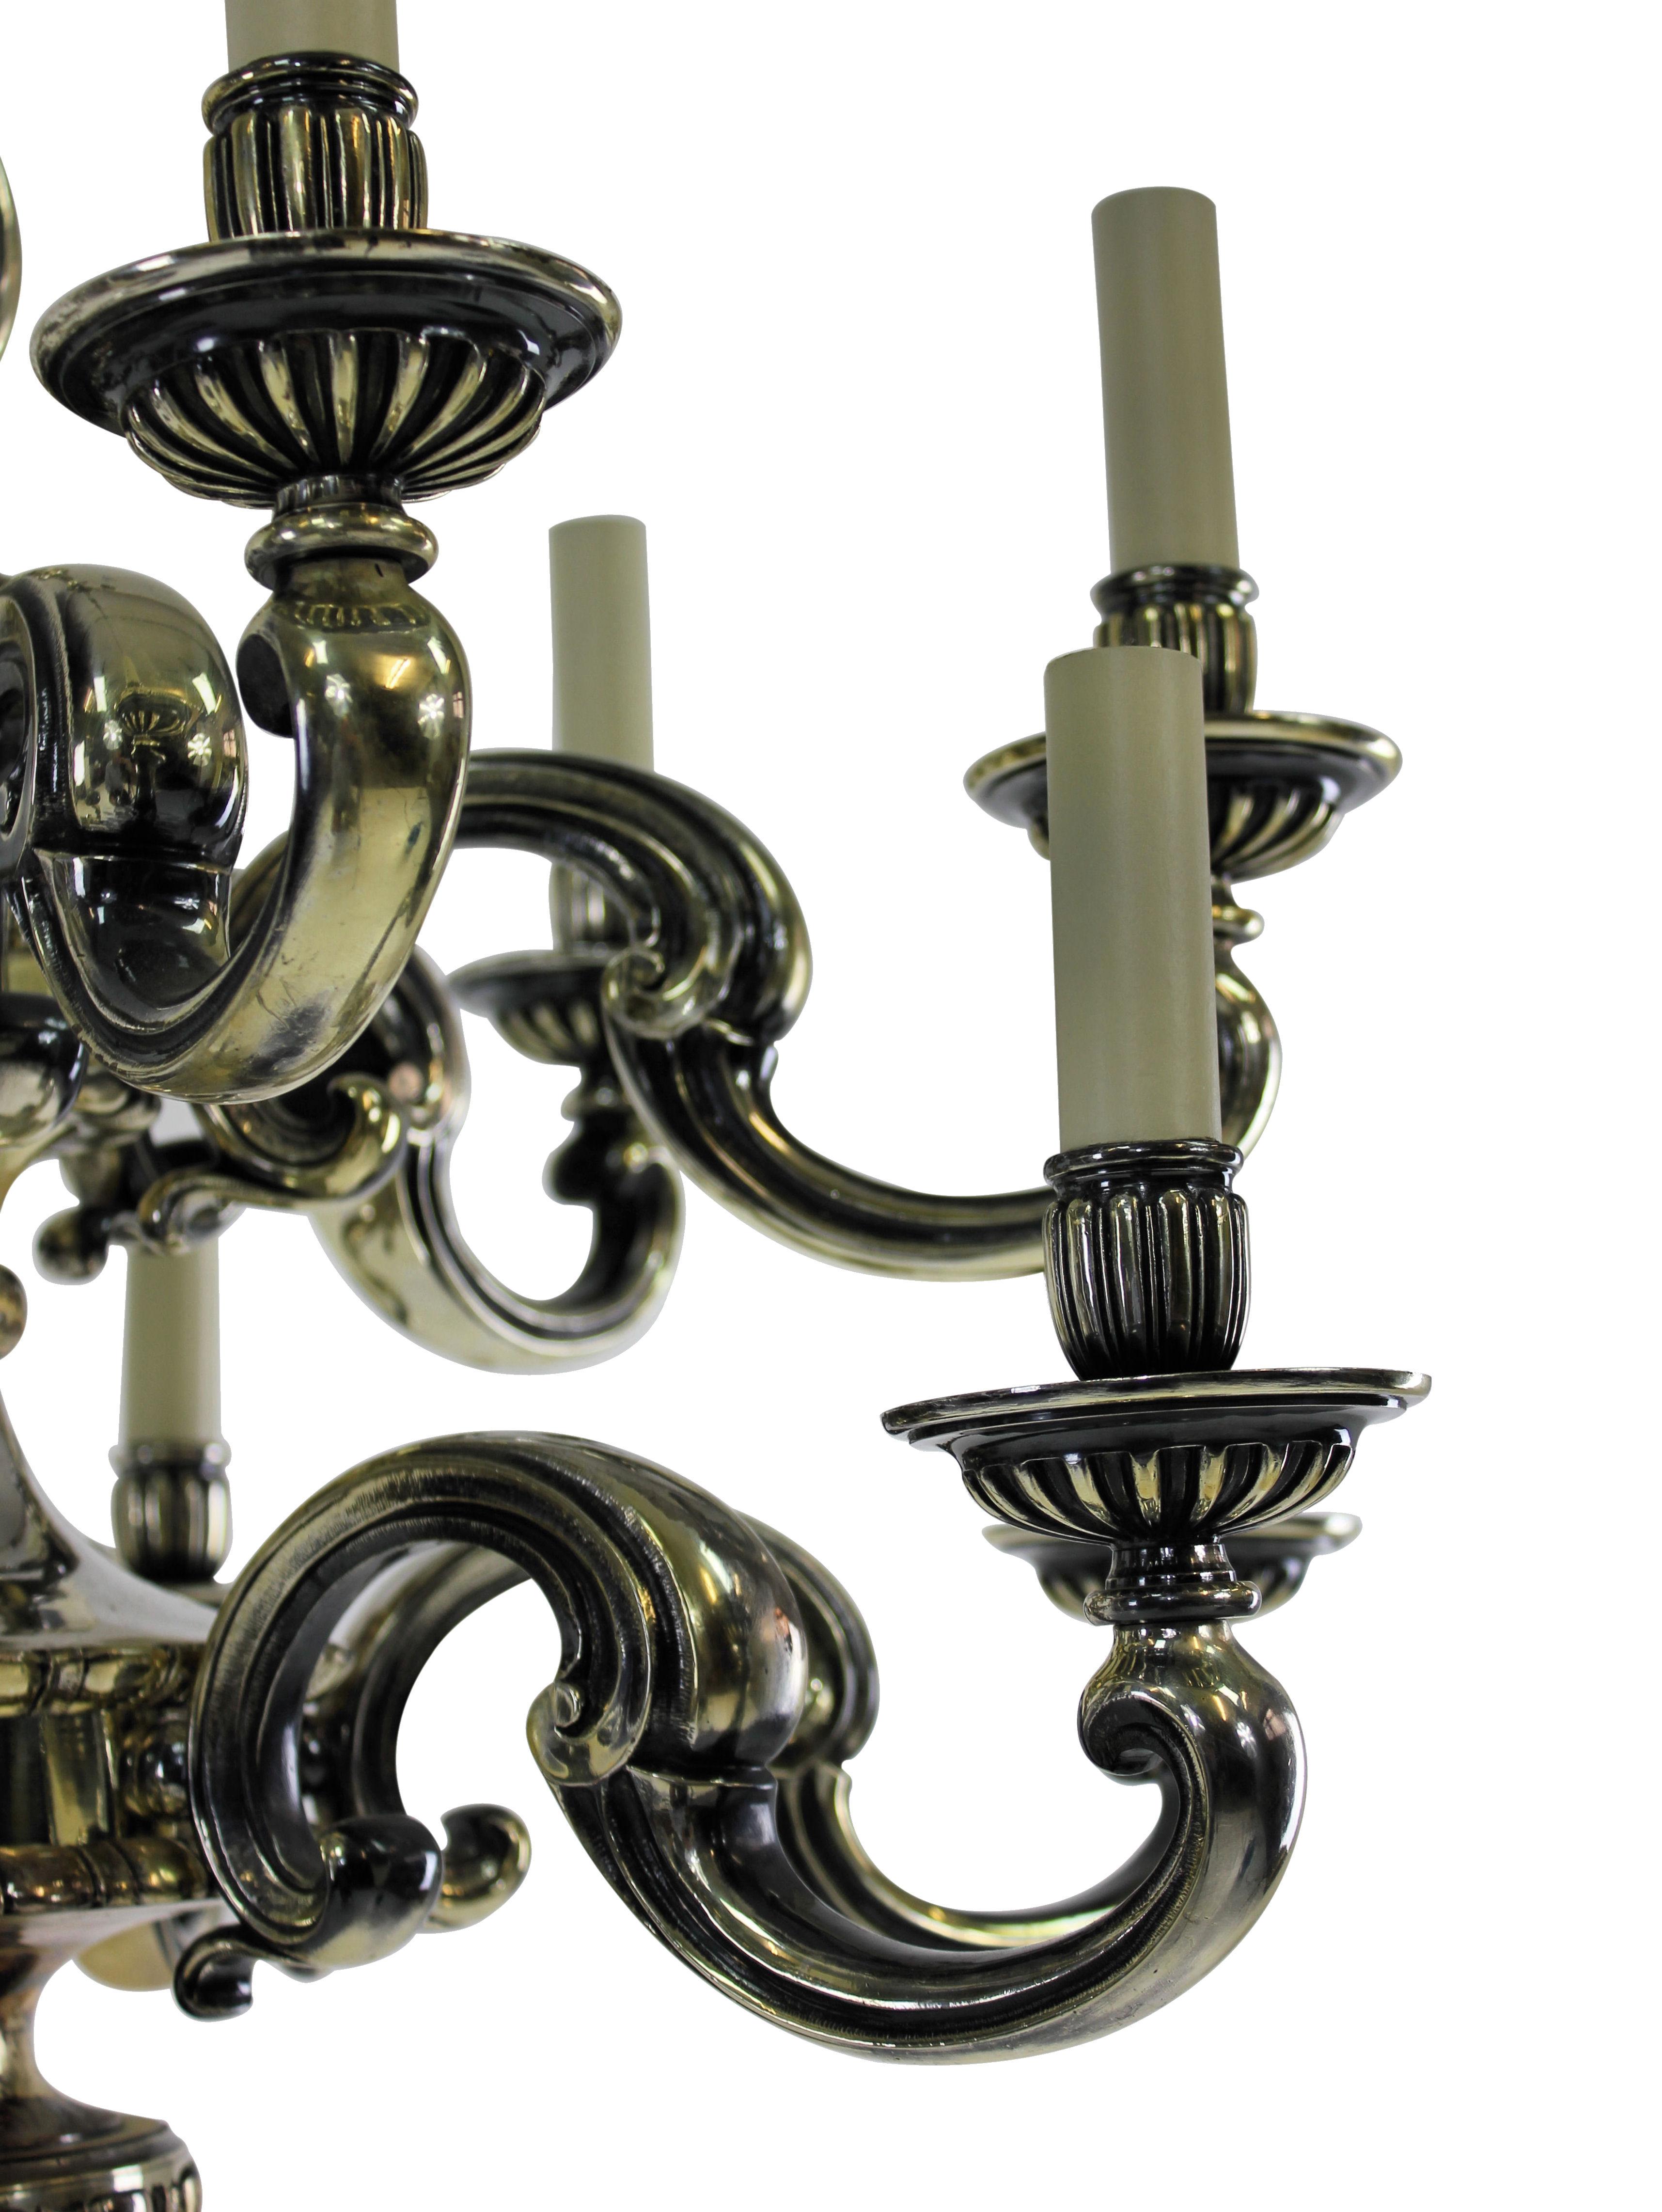 An English silver plated bronze chandelier of fine quality in the Charles II style comprising two tiers and twelve lights in total.

Newly electrified.